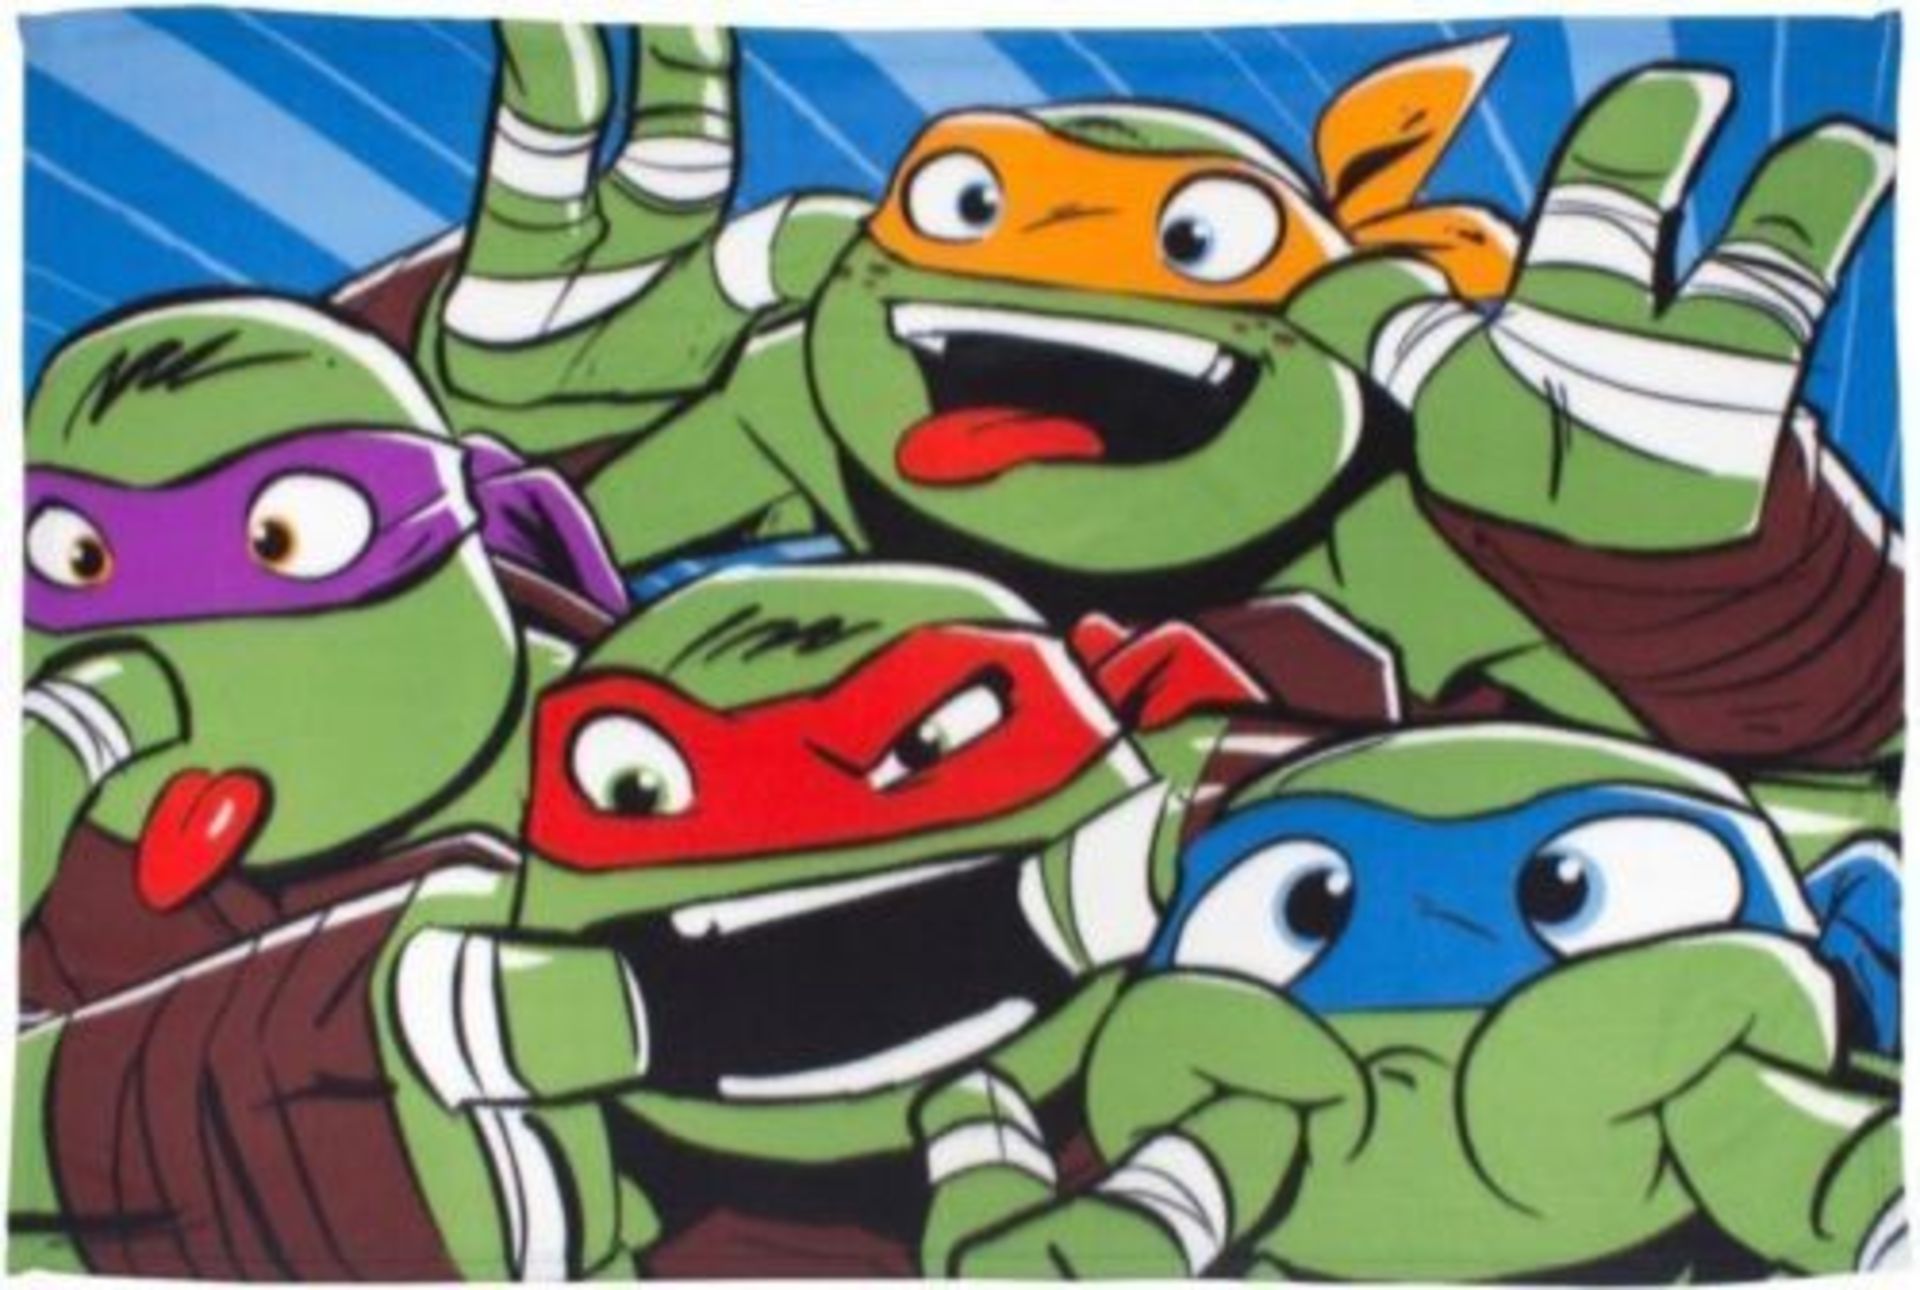 5pcs Teenage Turtle fleece blankets , new and sealed - 5pcs in lot